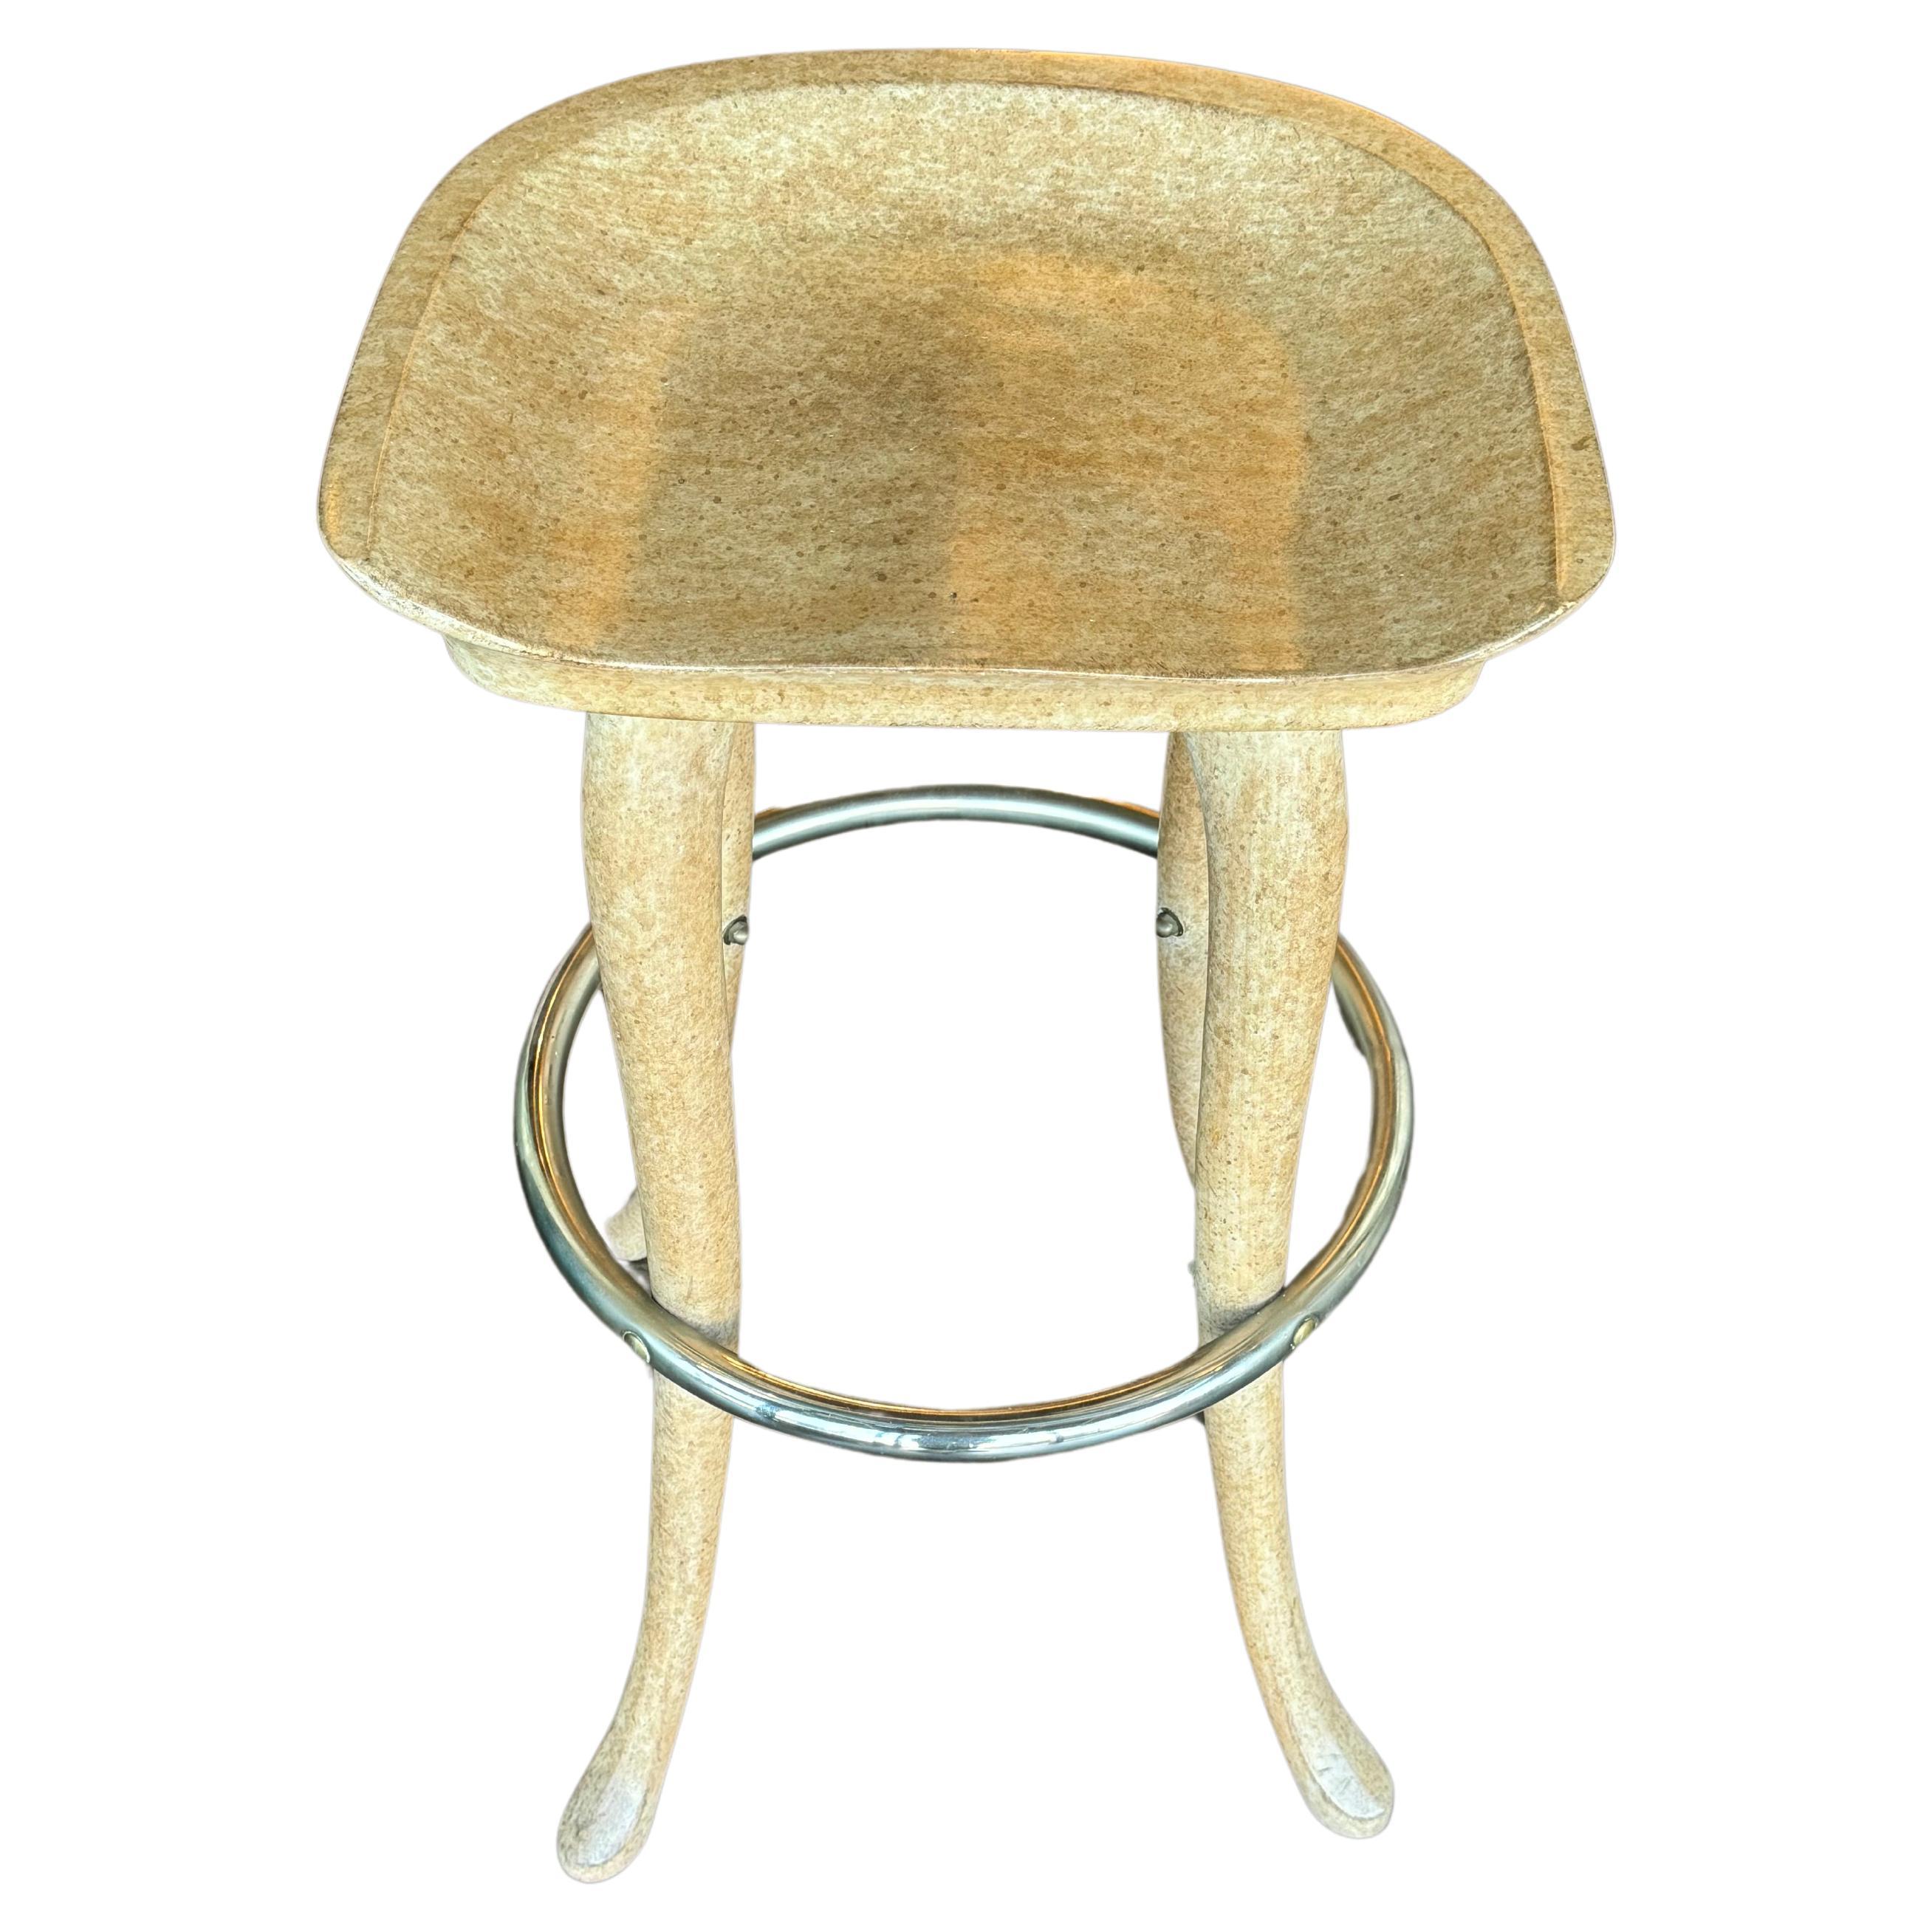 Introducing our charming Hand-Carved Soft Wood Elephant Stools—where artistry meets functionality in a delightful fusion. Crafted with care, each stool captures the whimsical spirit of elephants, paired with sleek steel footrests for a modern